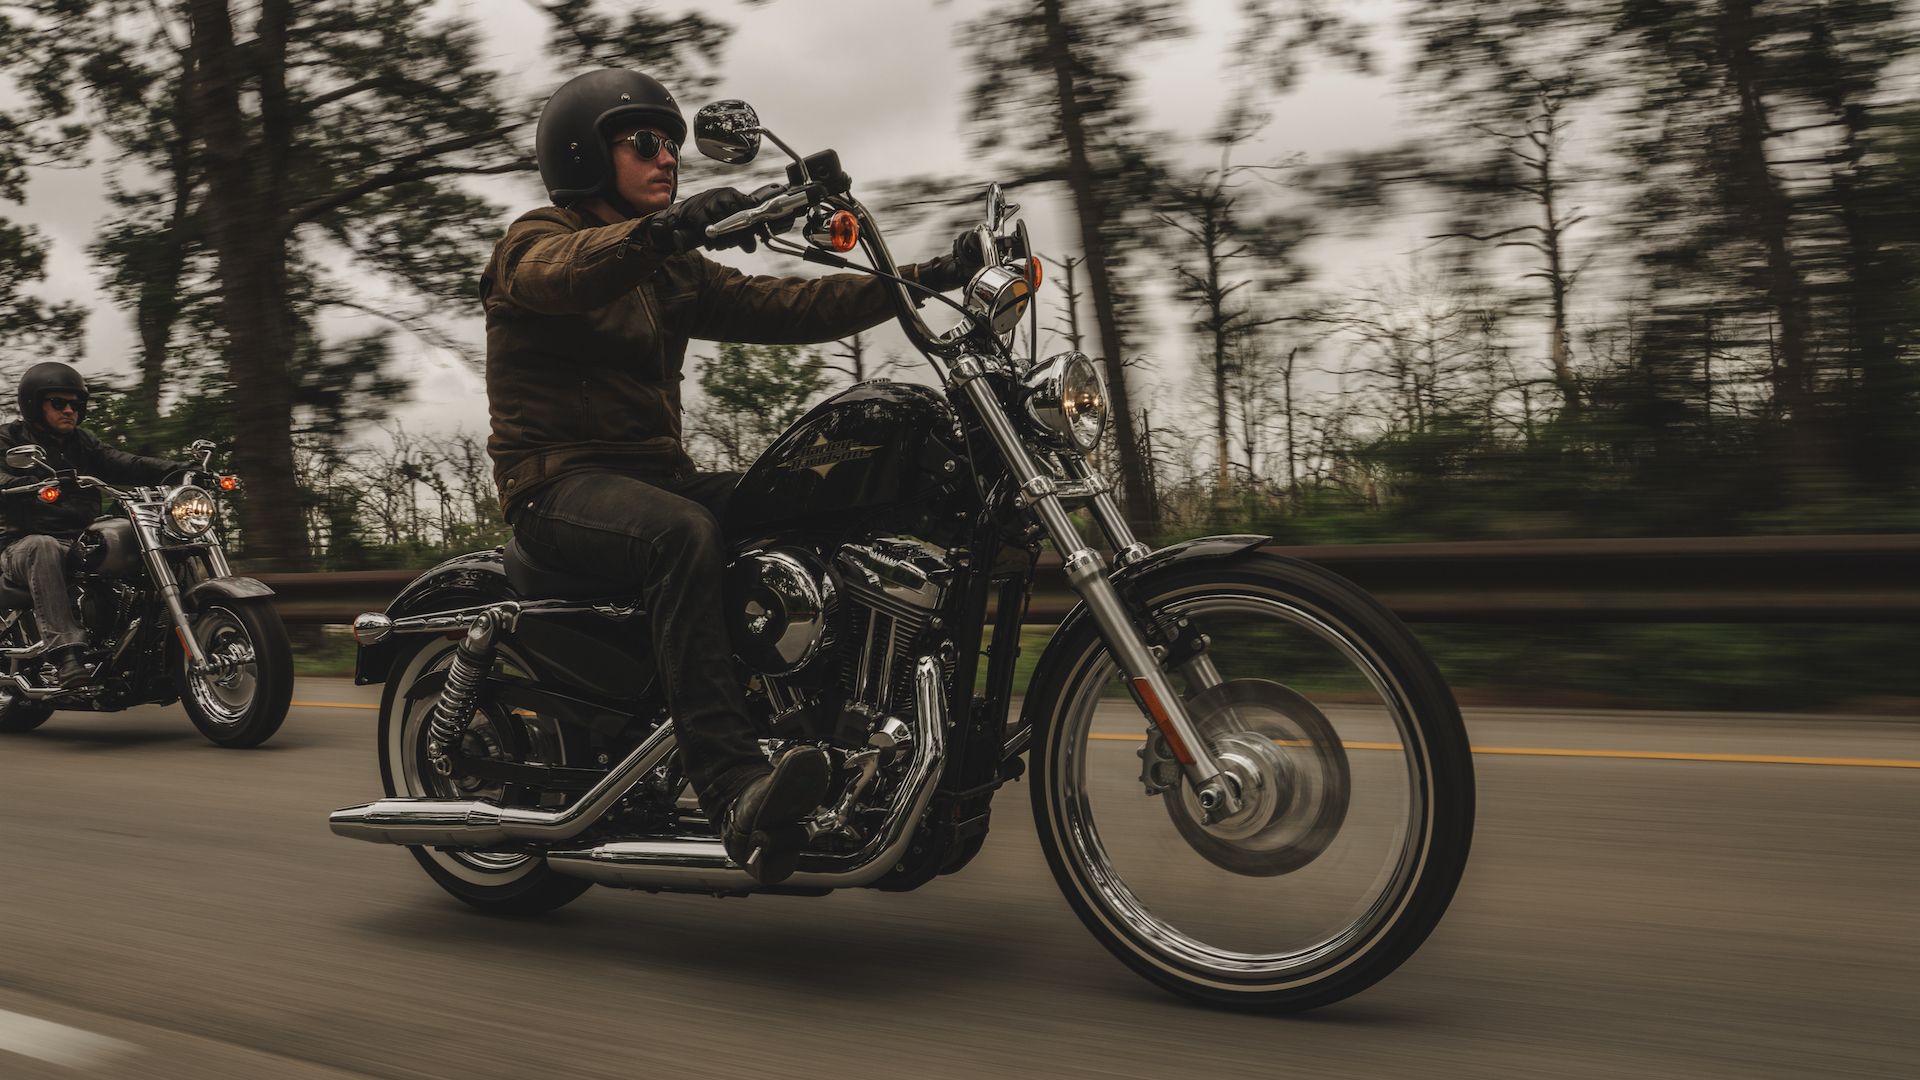 A 2016 Harley-Davidson Sportster Seventy-Two riding on the road.